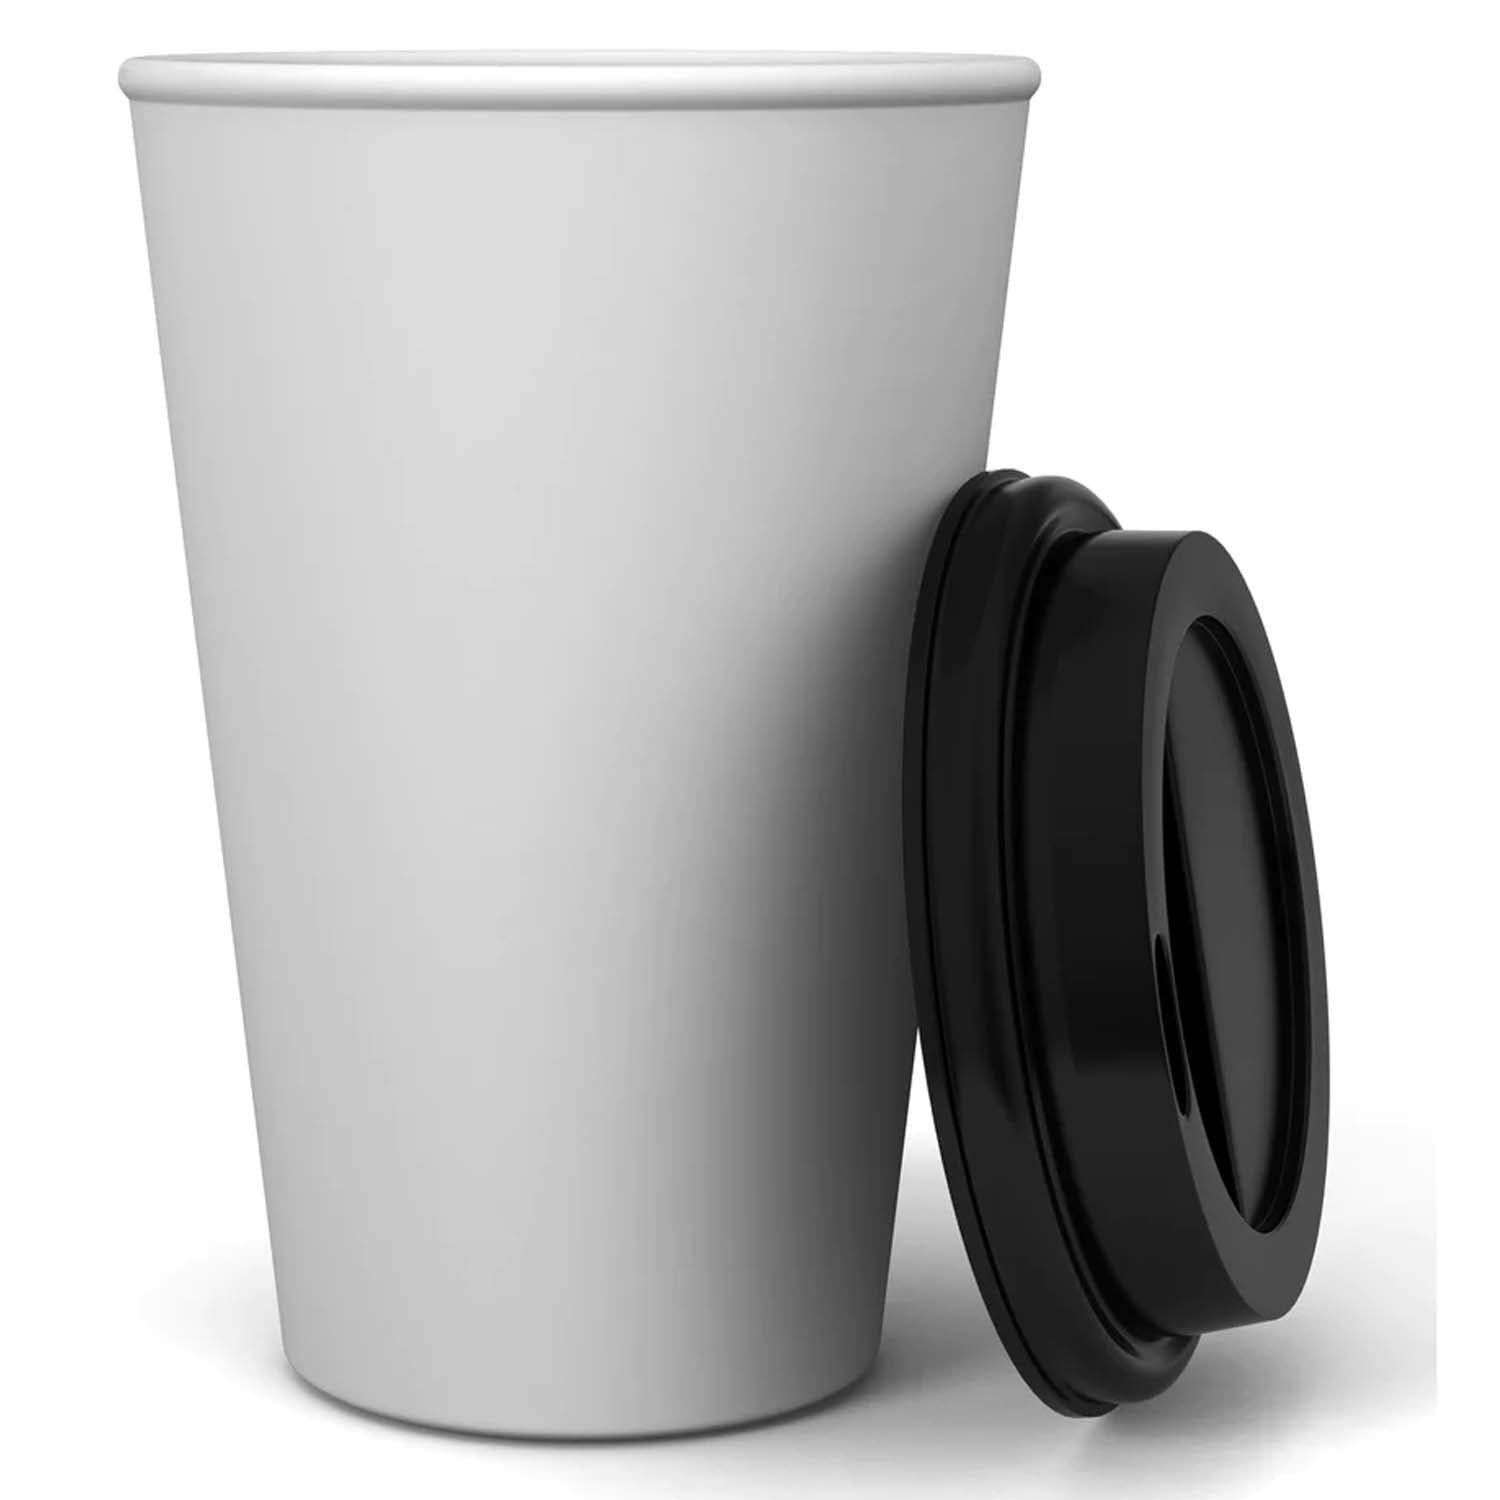 12oz Disposable White Paper Hot Cold Cups with Black Dome Lids